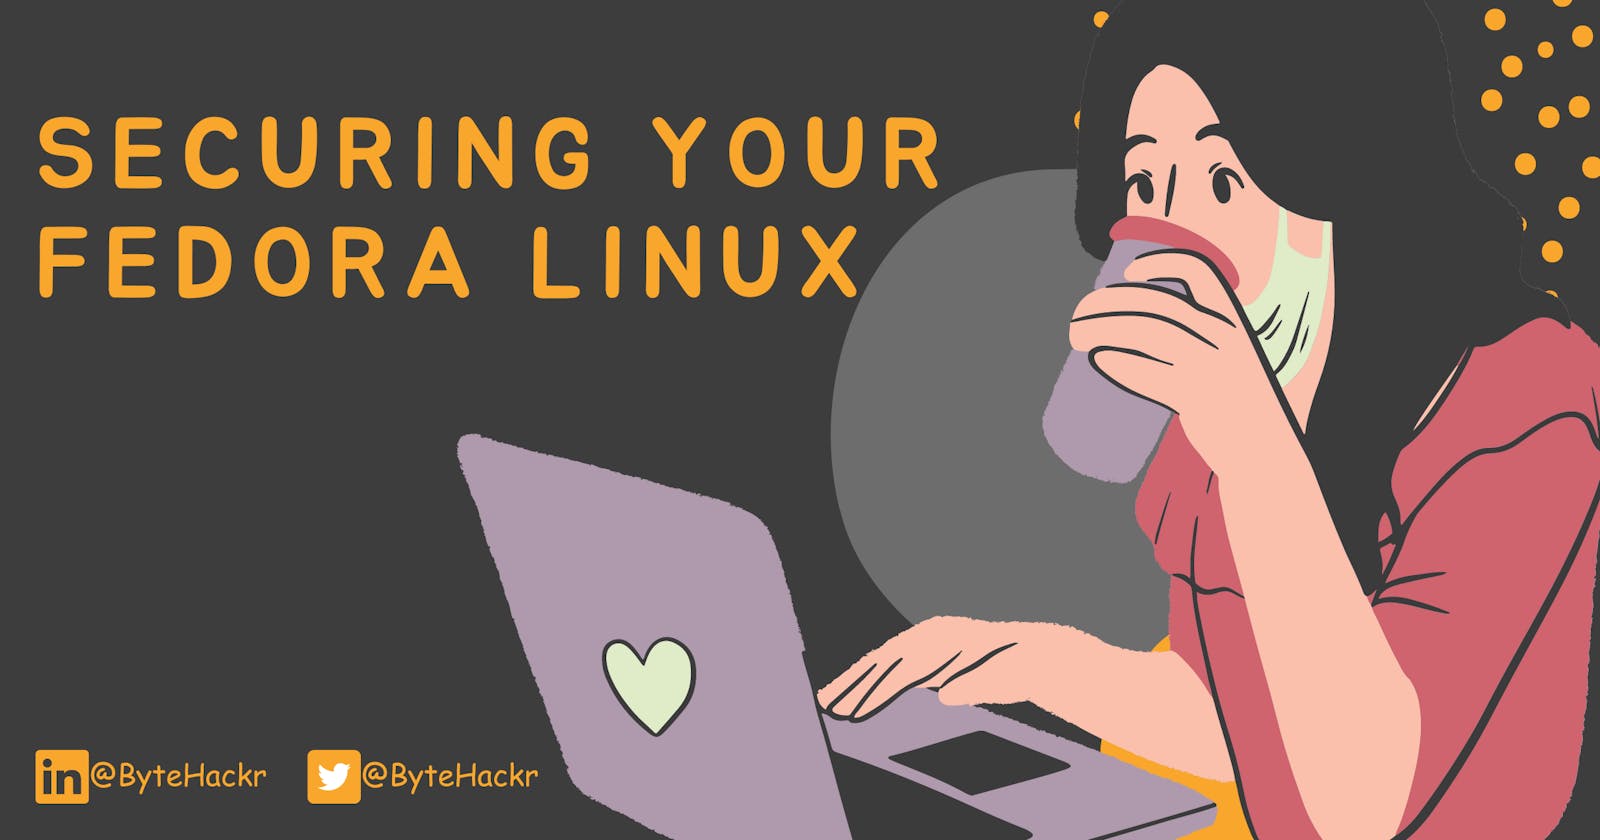 10 Effective Tips for Strengthening Security in Fedora Linux